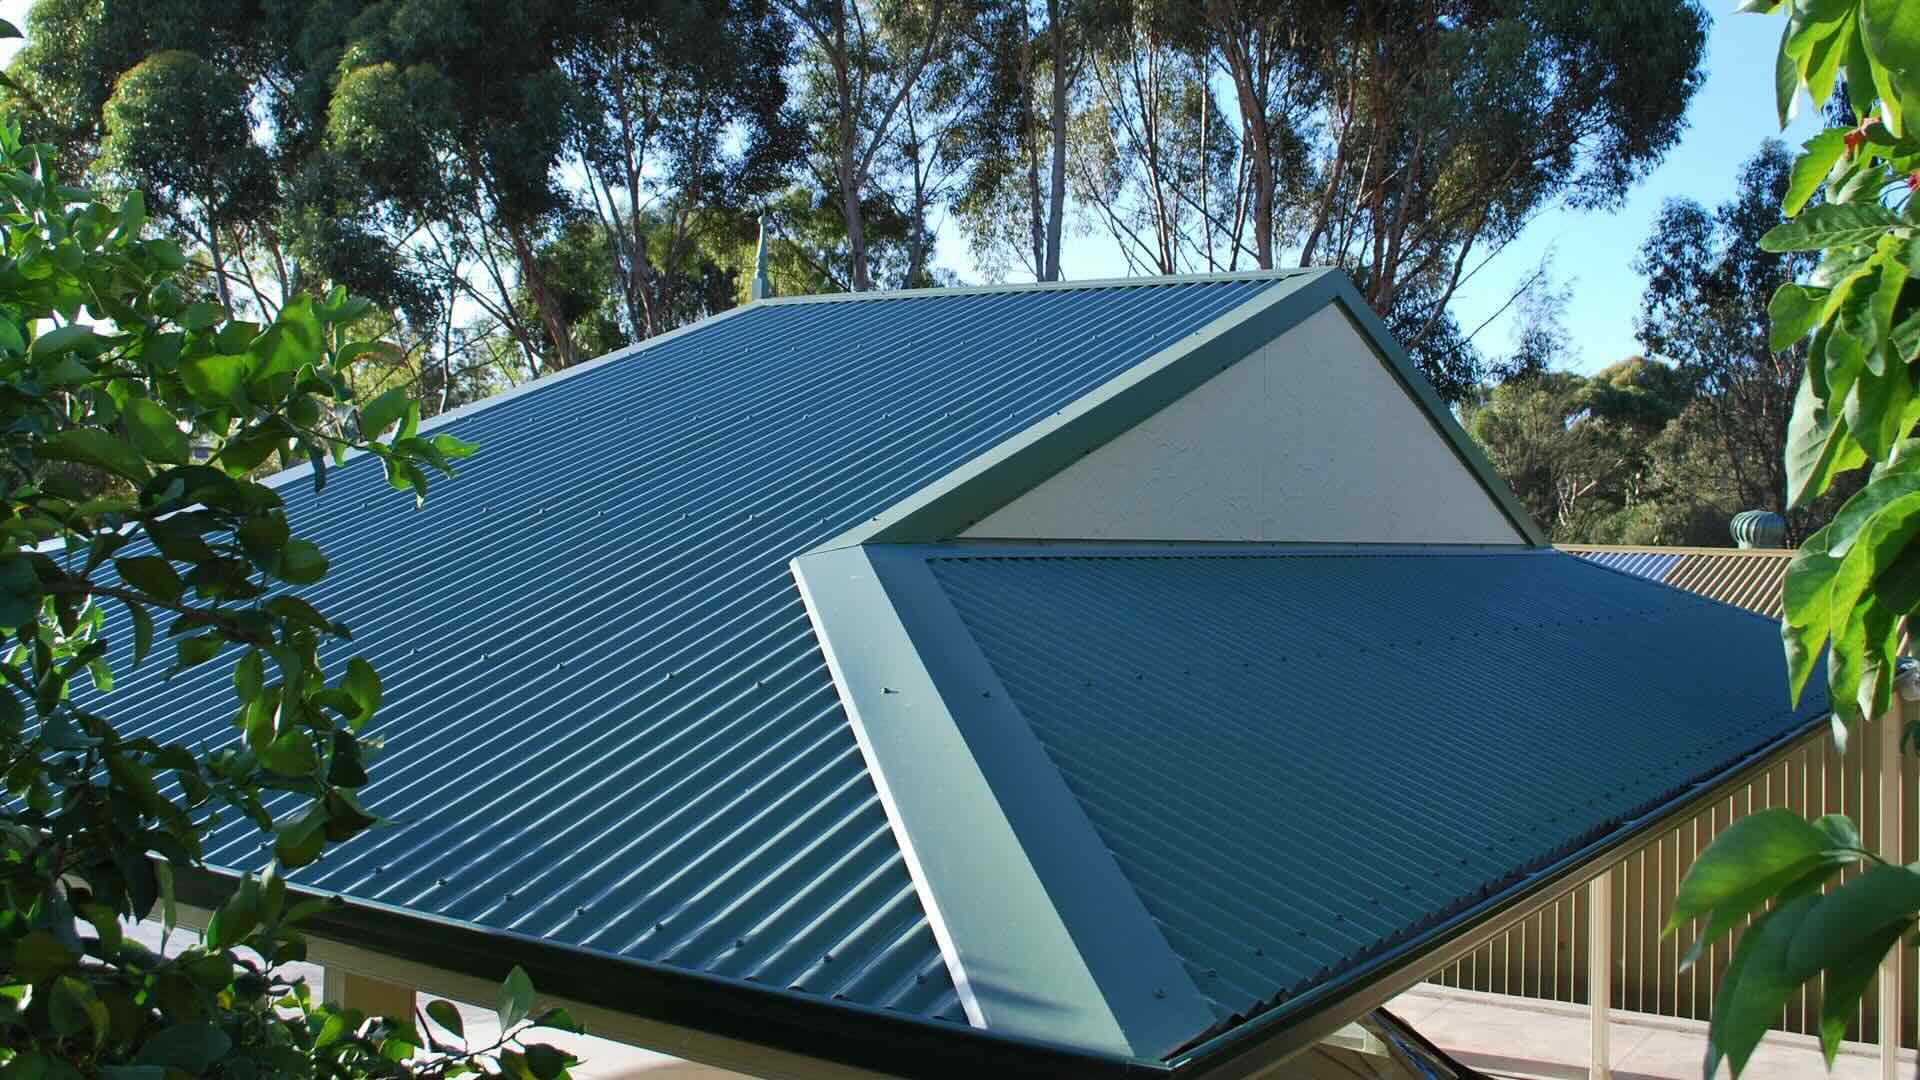 What Is A Gable On A Roof?